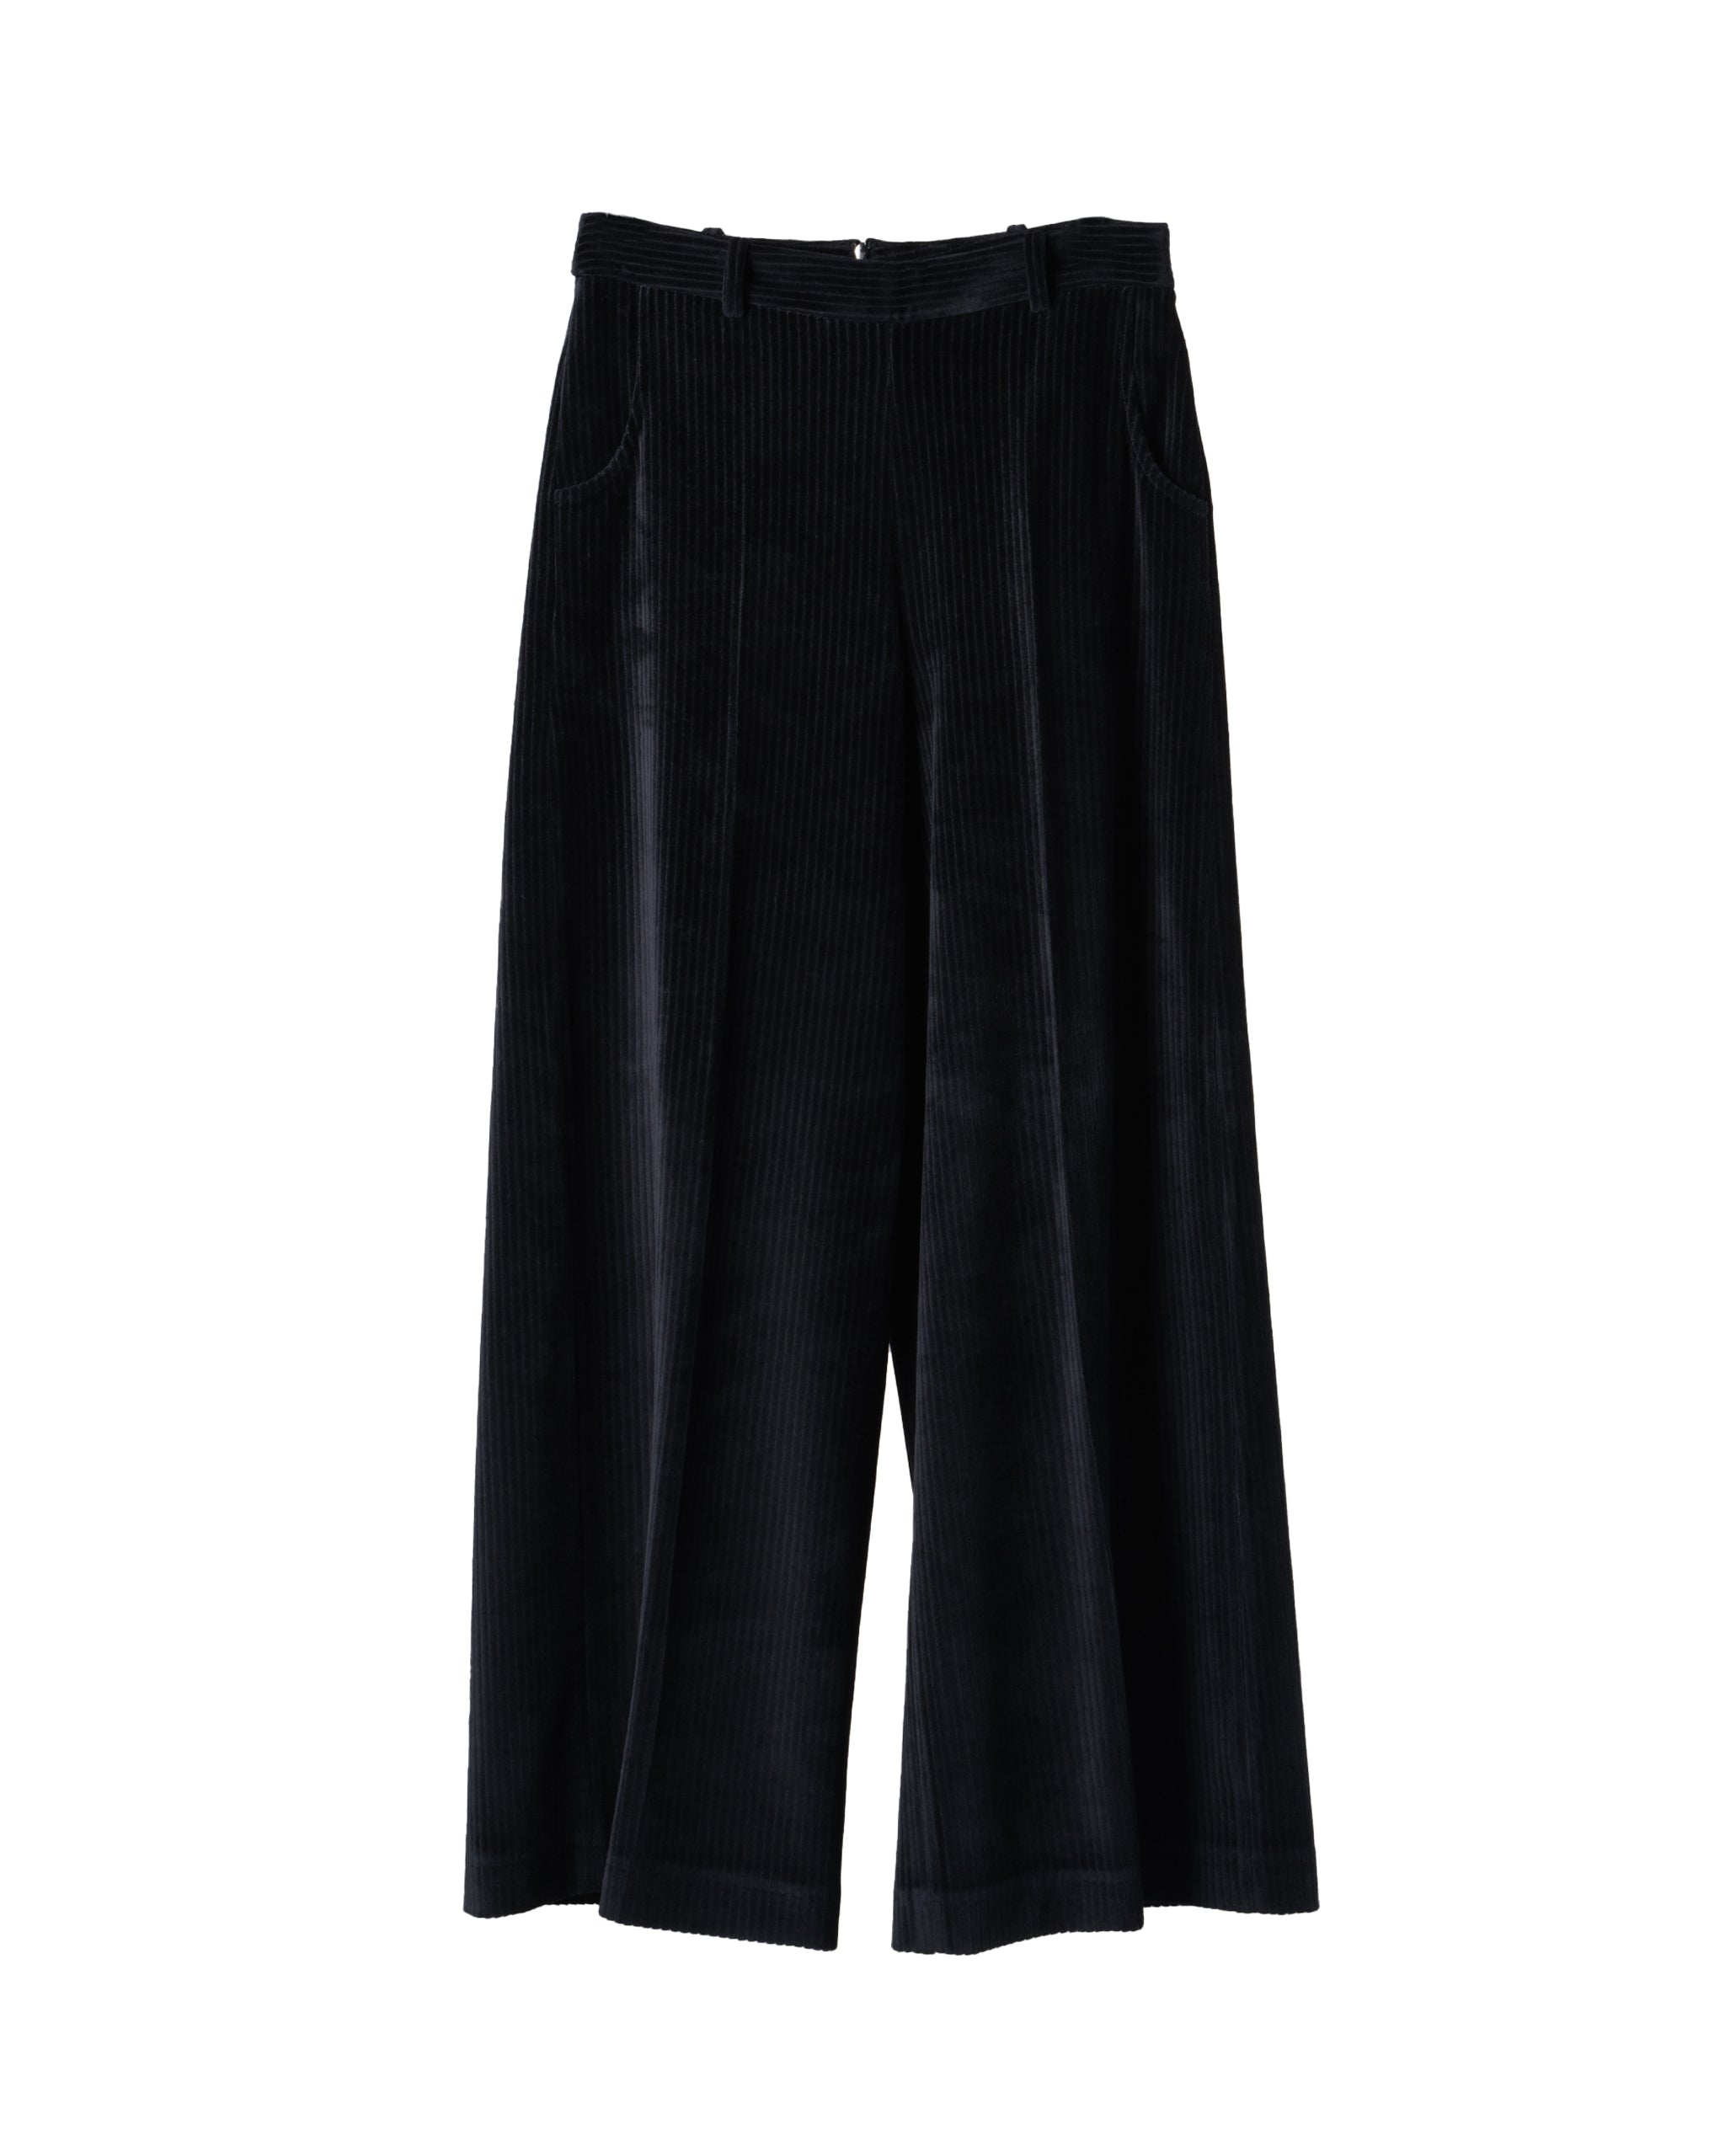 EXTRA WIDE LONG PANTS